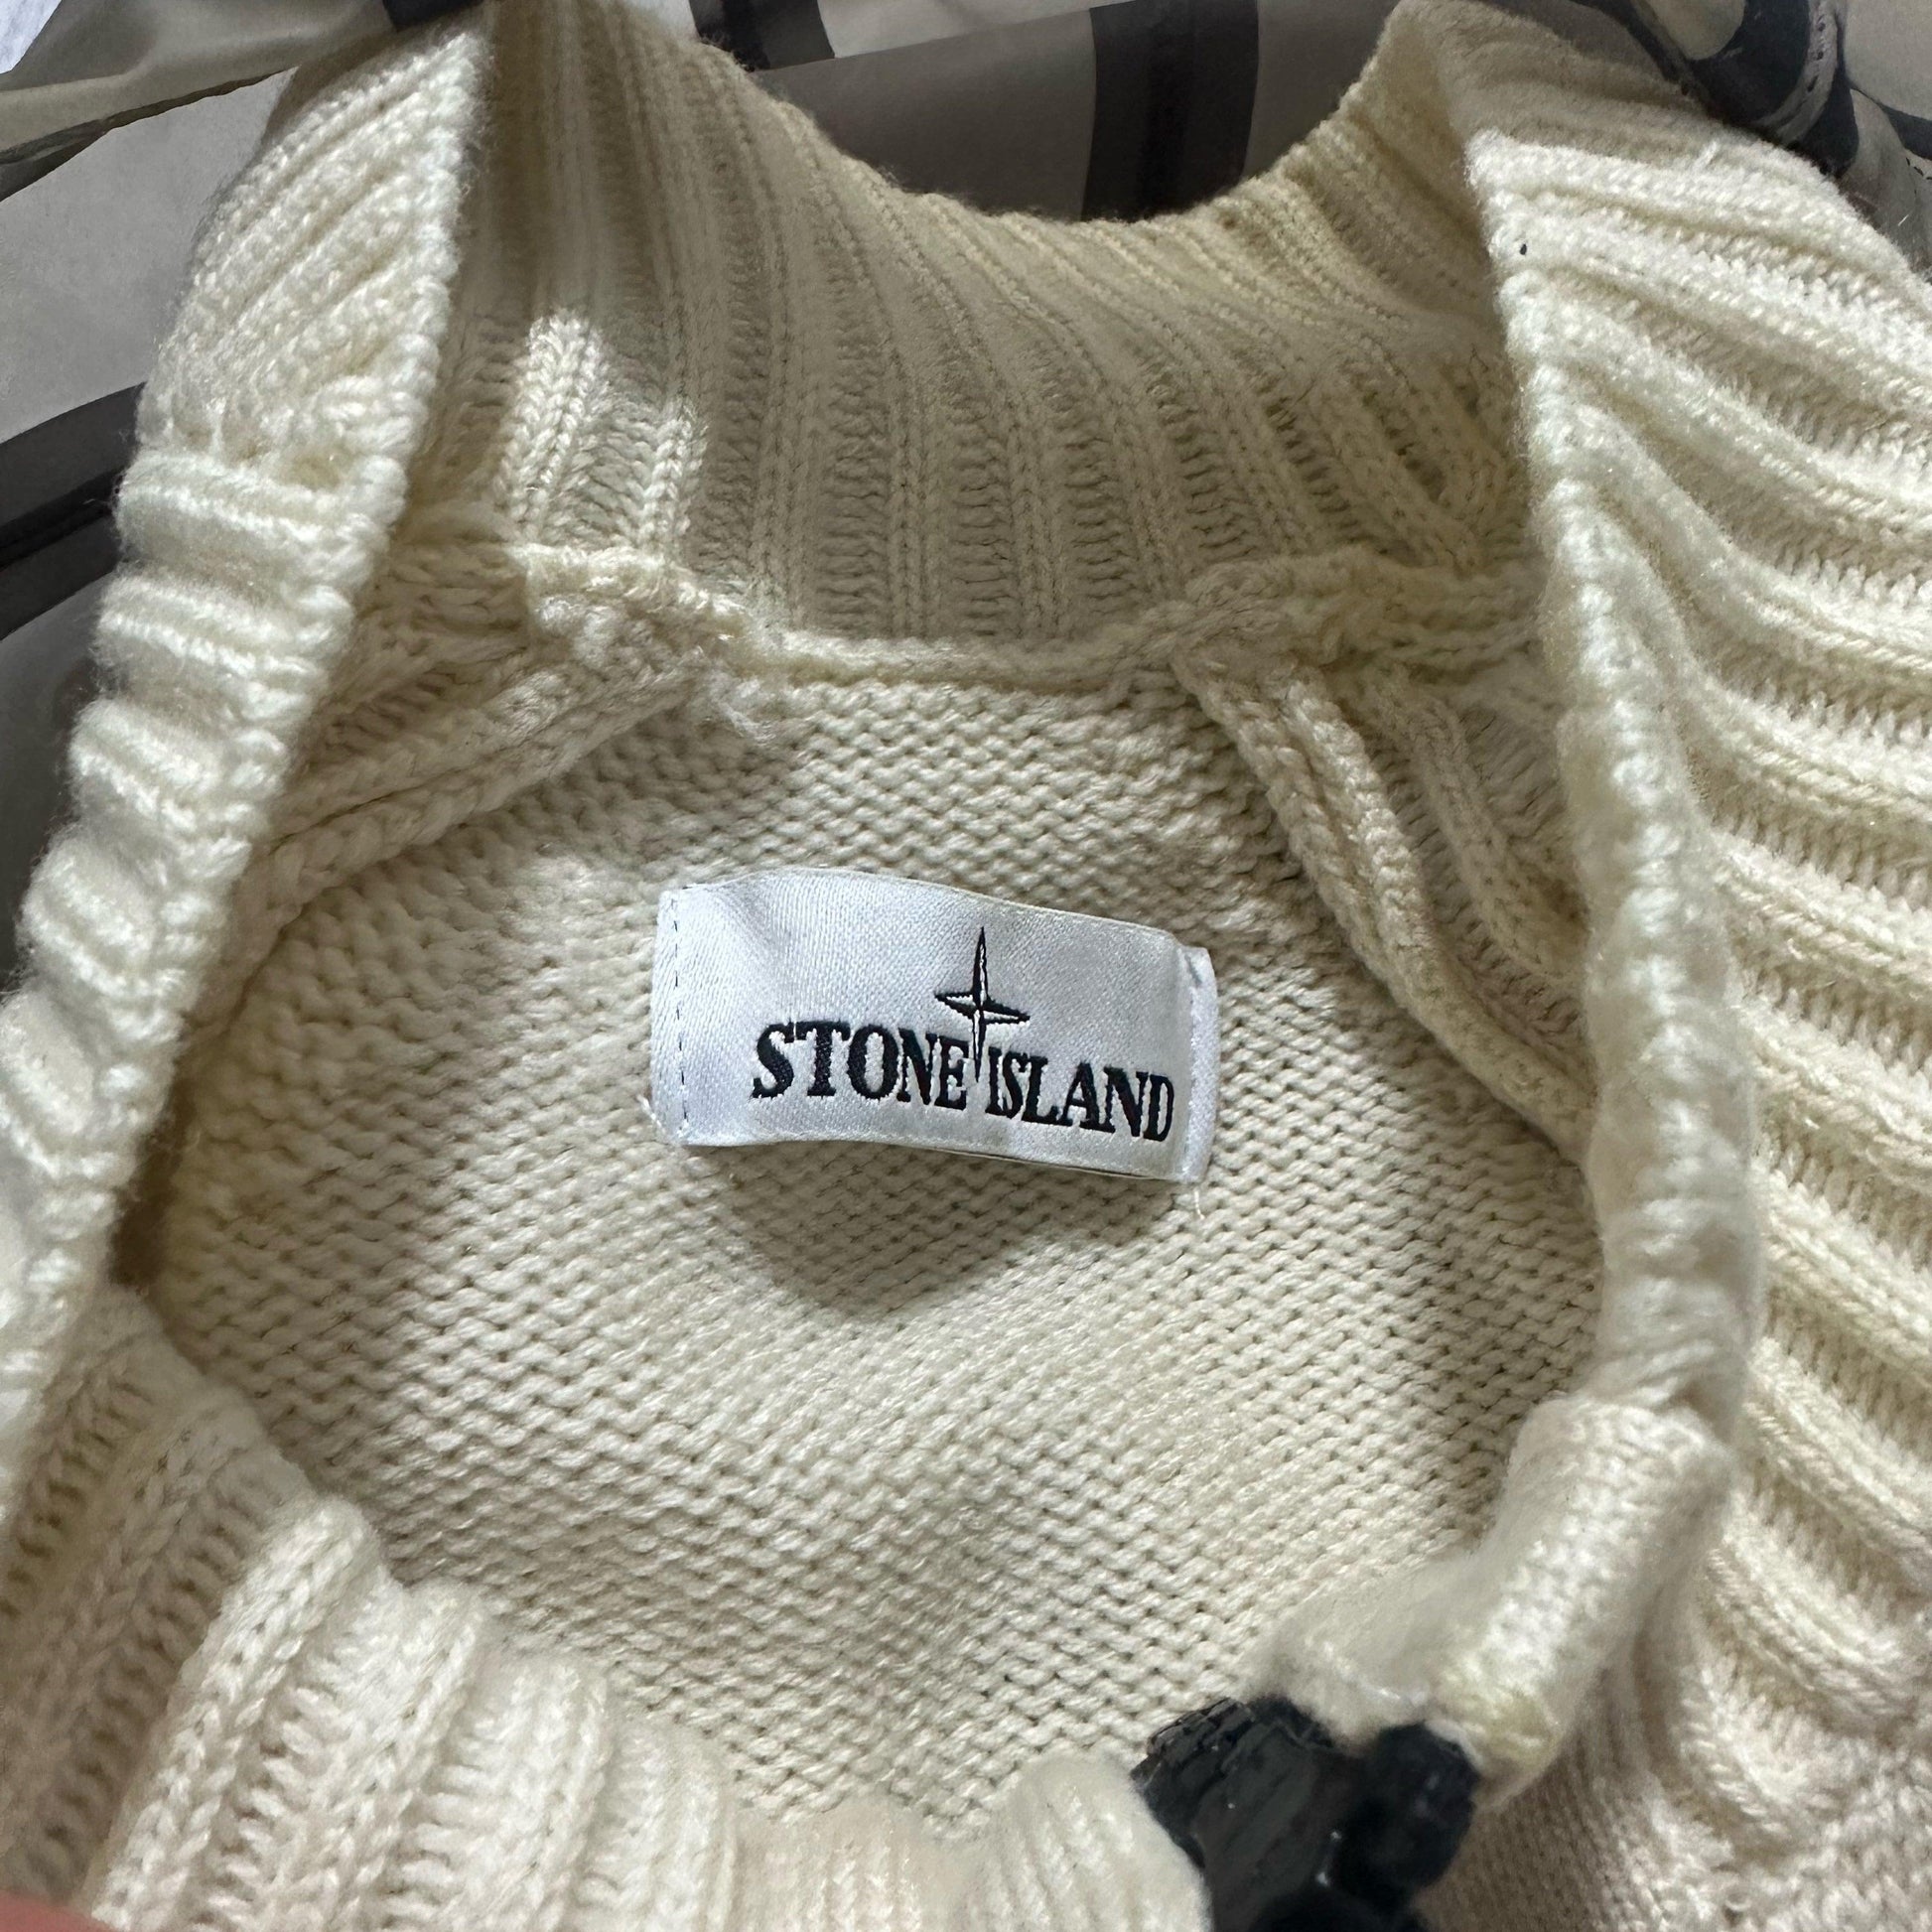 Stone Island Poly Cover Composite Jacket with Knit Inner - Known Source